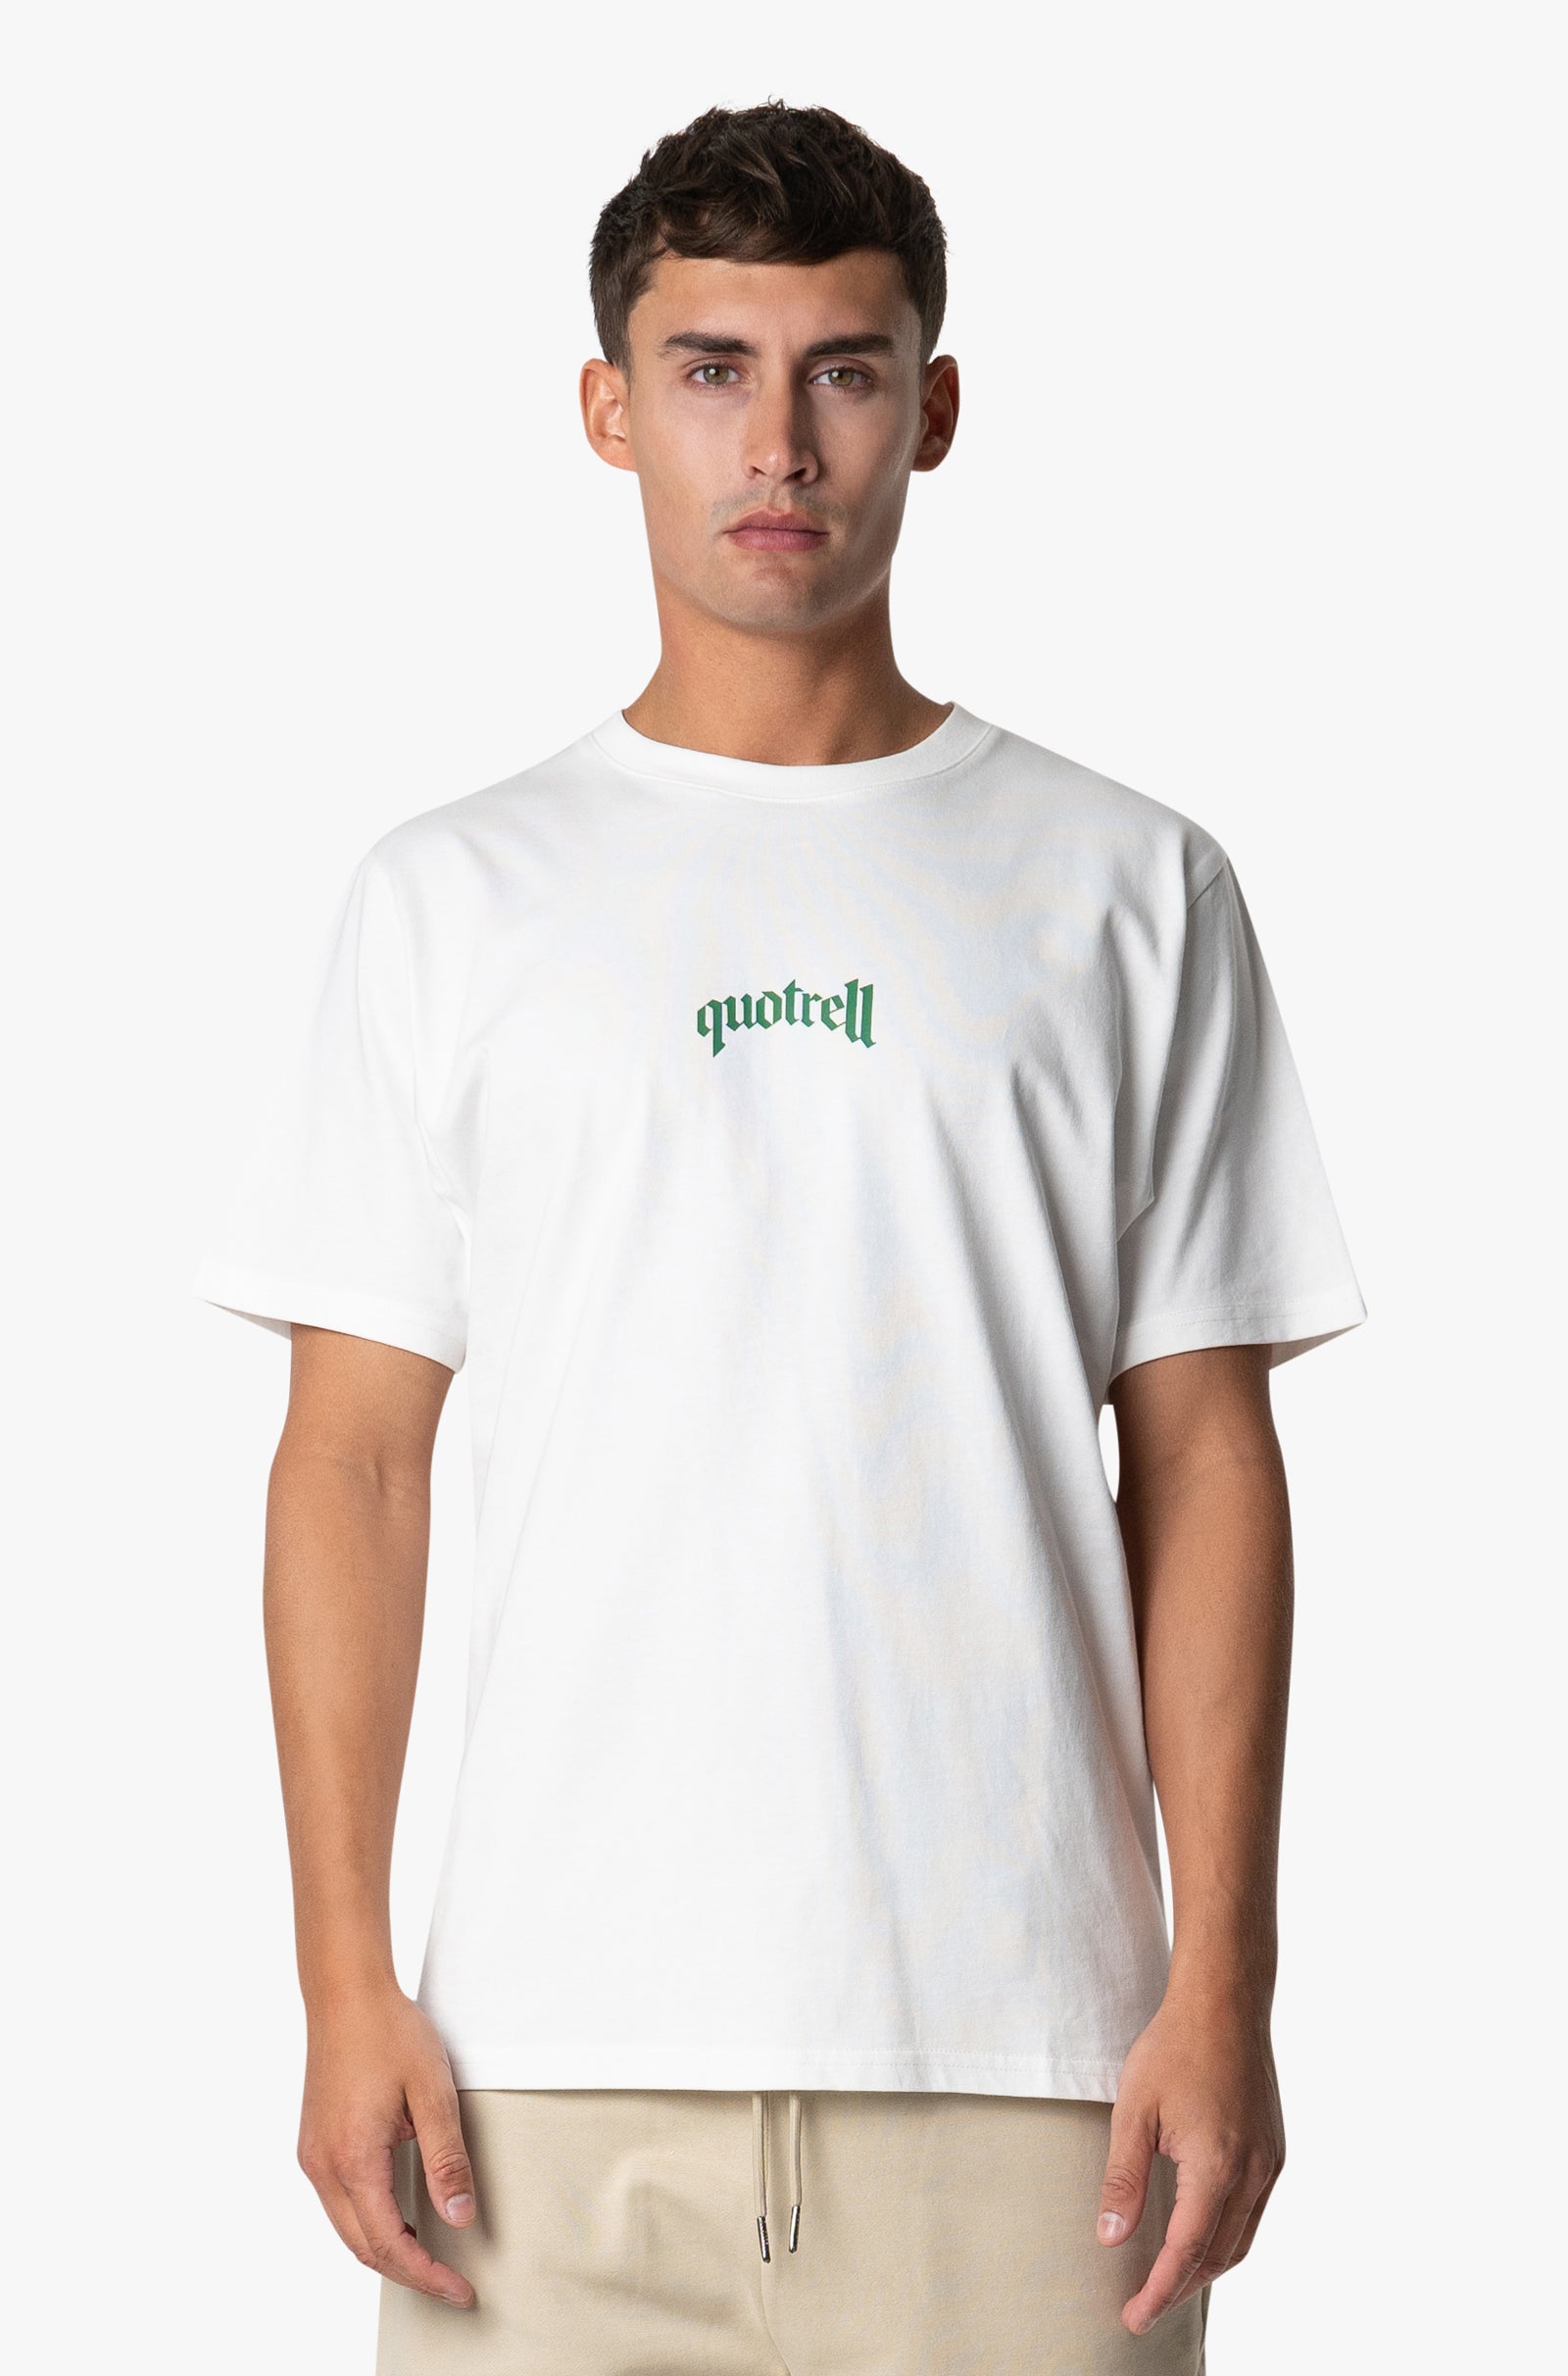 Quotrell Global Unity T-shirt